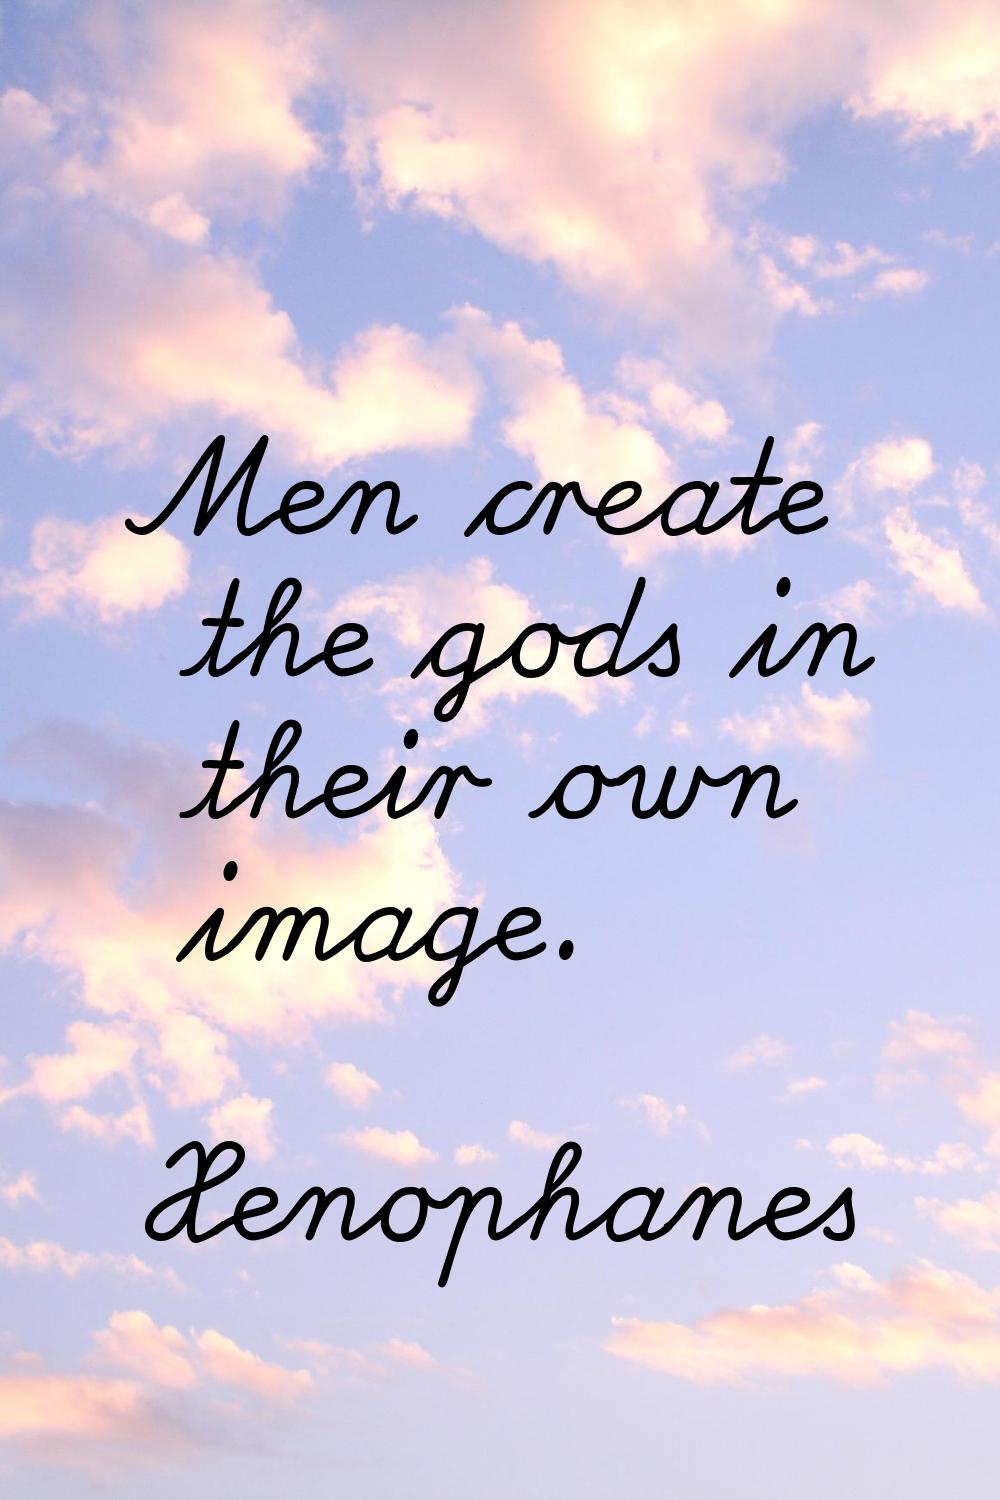 Men create the gods in their own image.